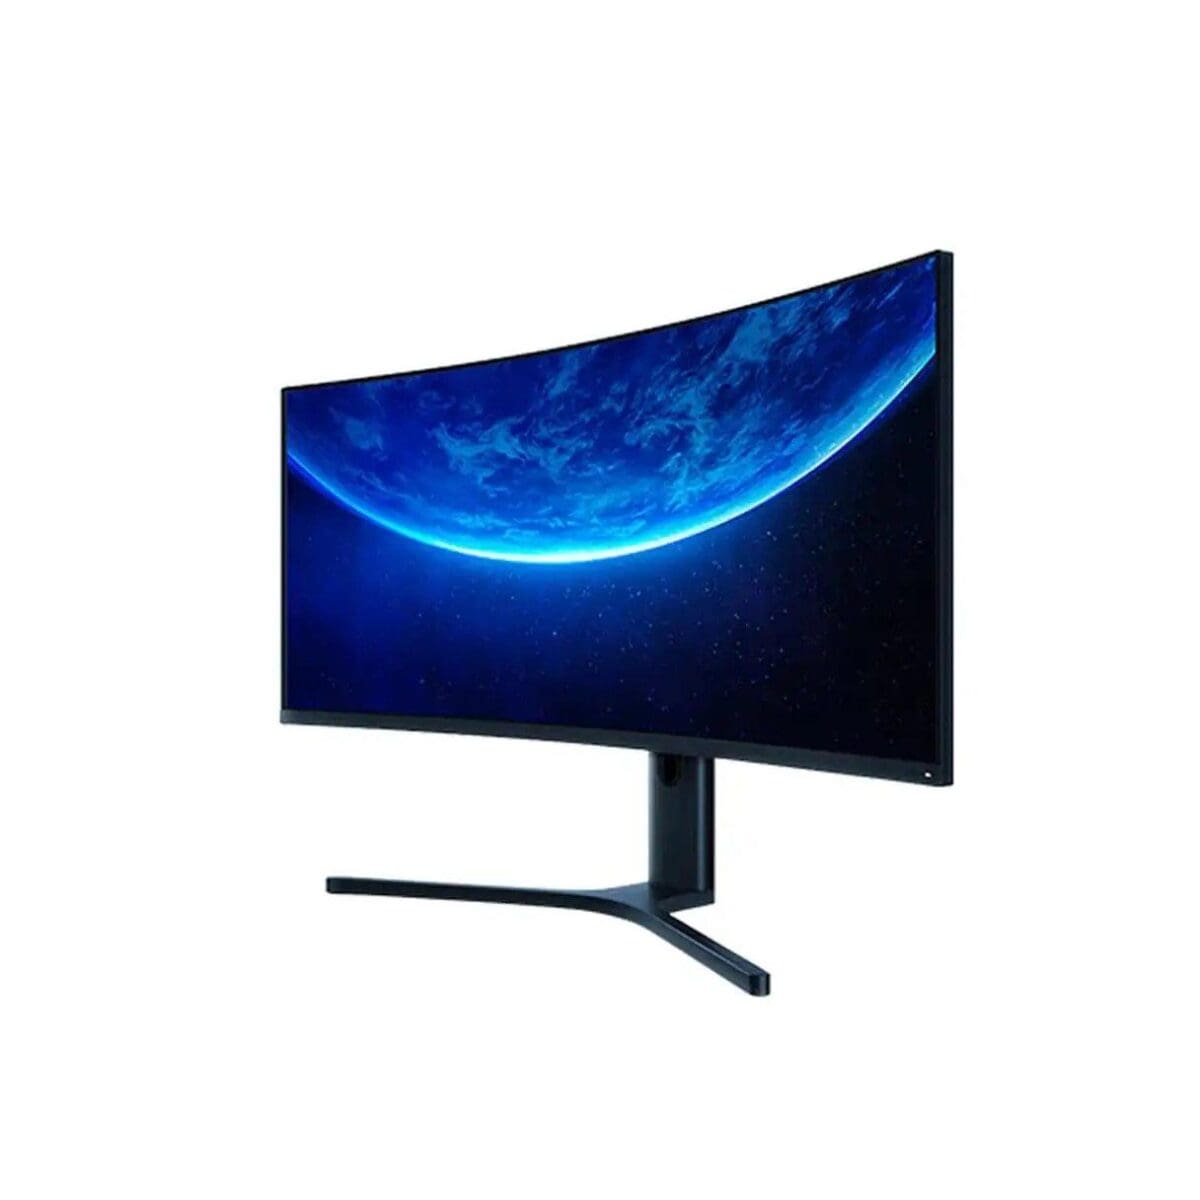 Mi Curved Gaming Monitor 34″